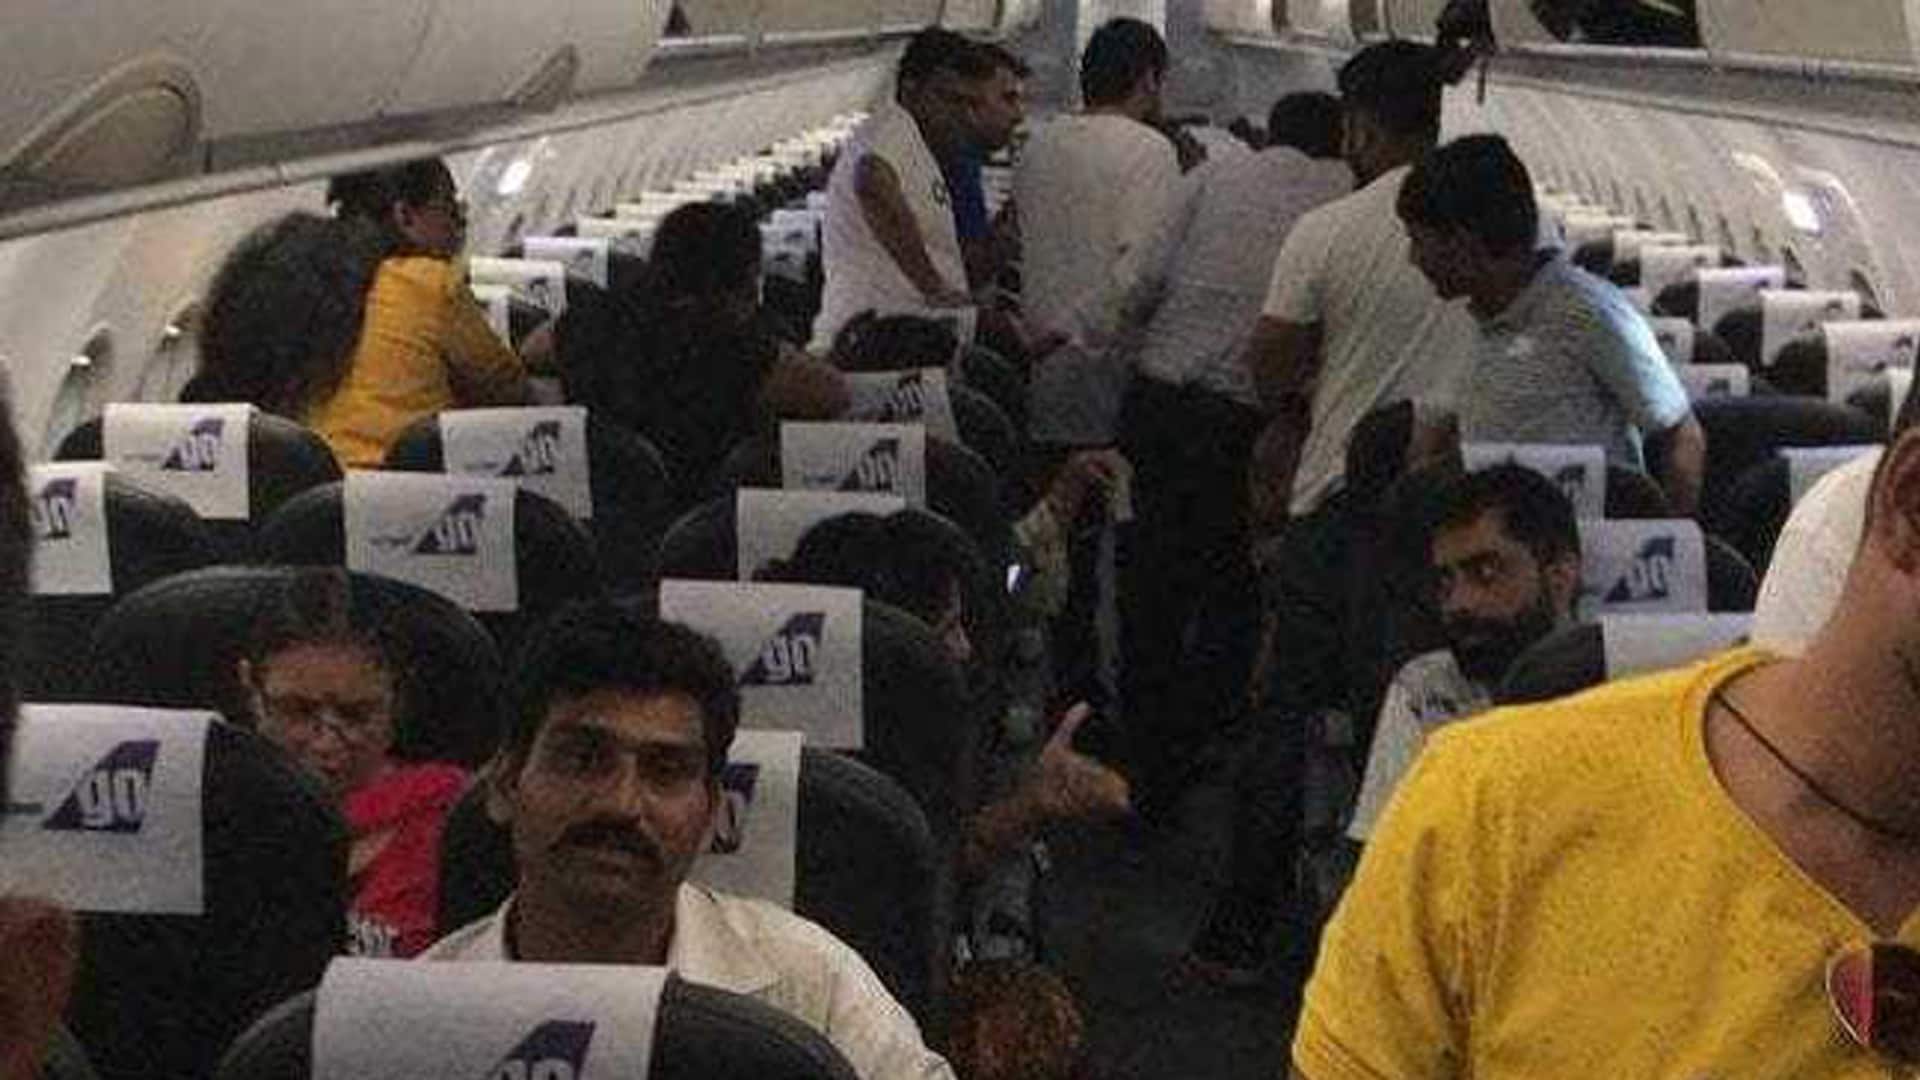 Go Air flight gets delayed for hours; panic-stricken passengers send SOS